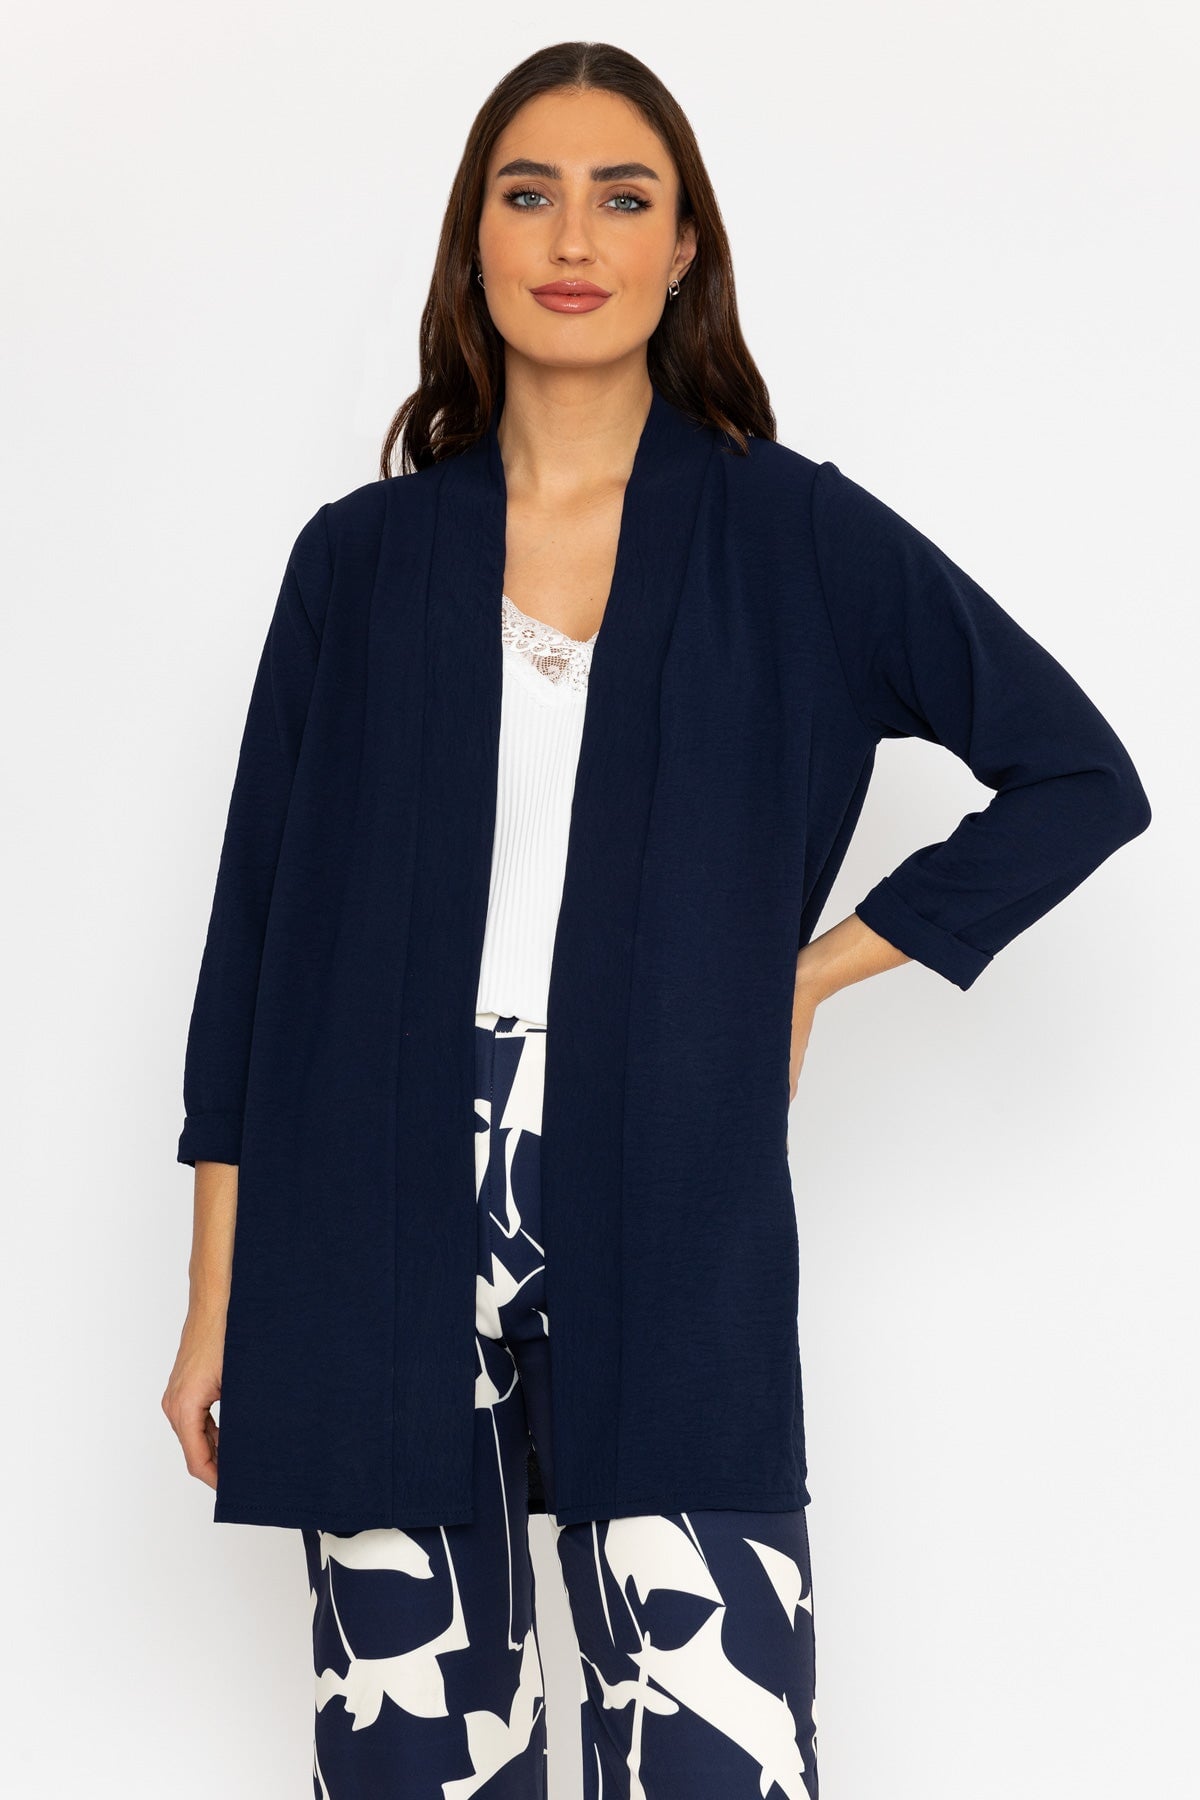 Kimono Cover Up in Navy | Layering | Carraig Donn